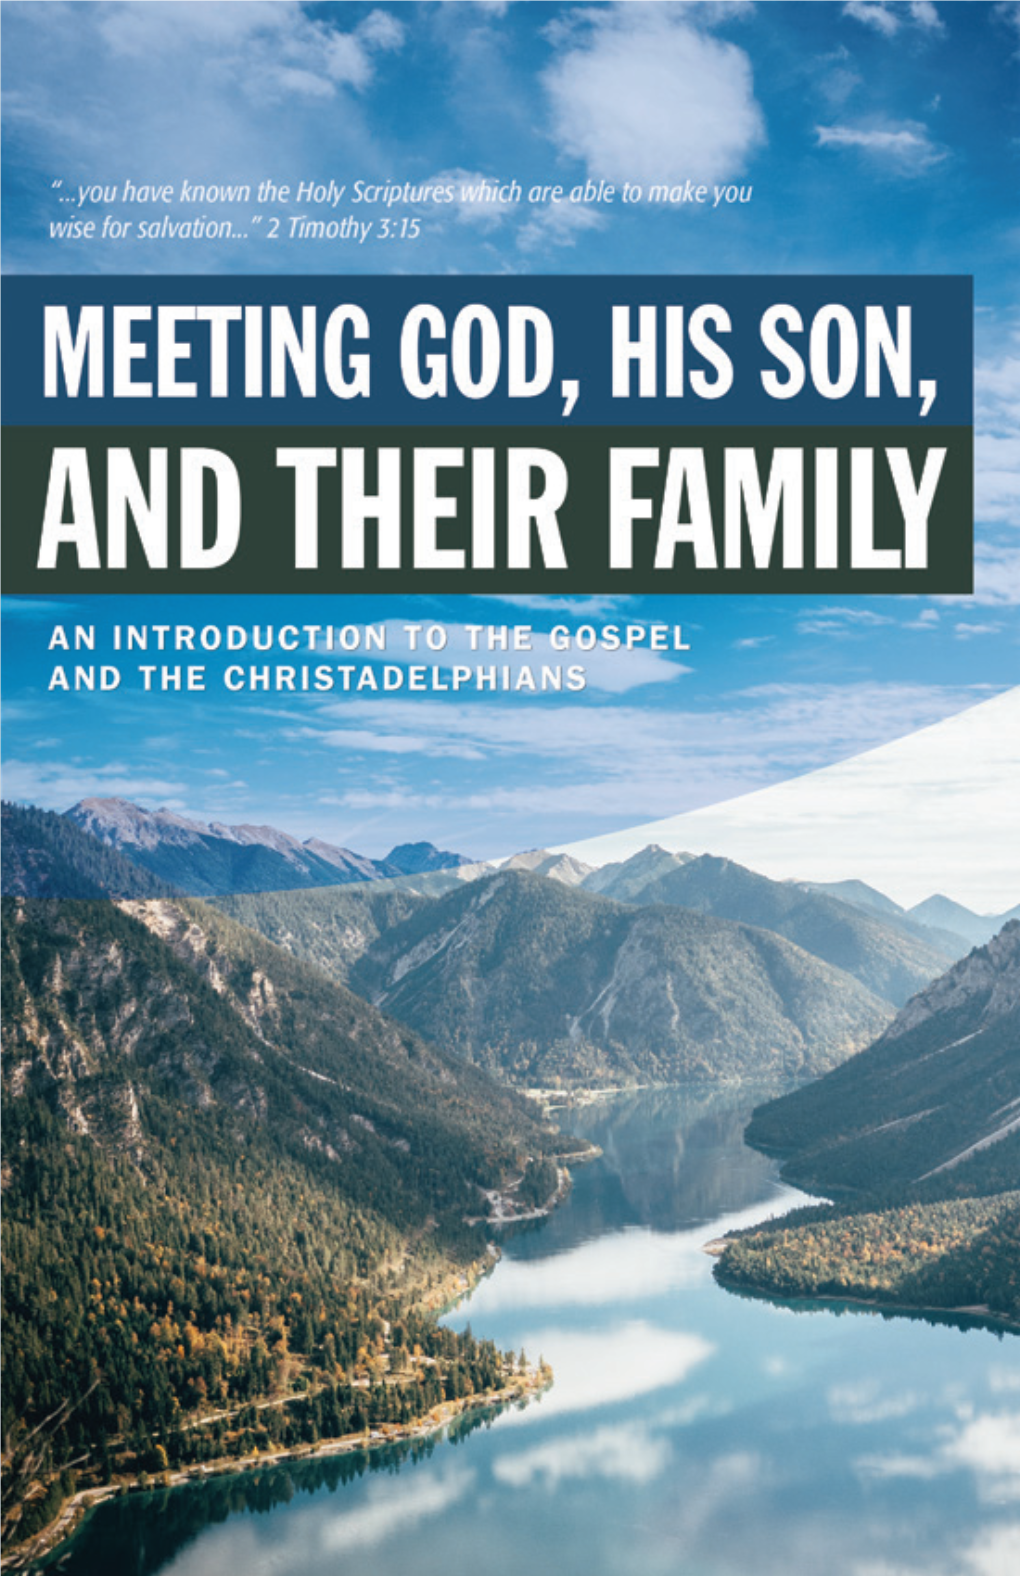 Meeting God, His Son, and Their Family an Introduction to the Gospel and the Christadelphians